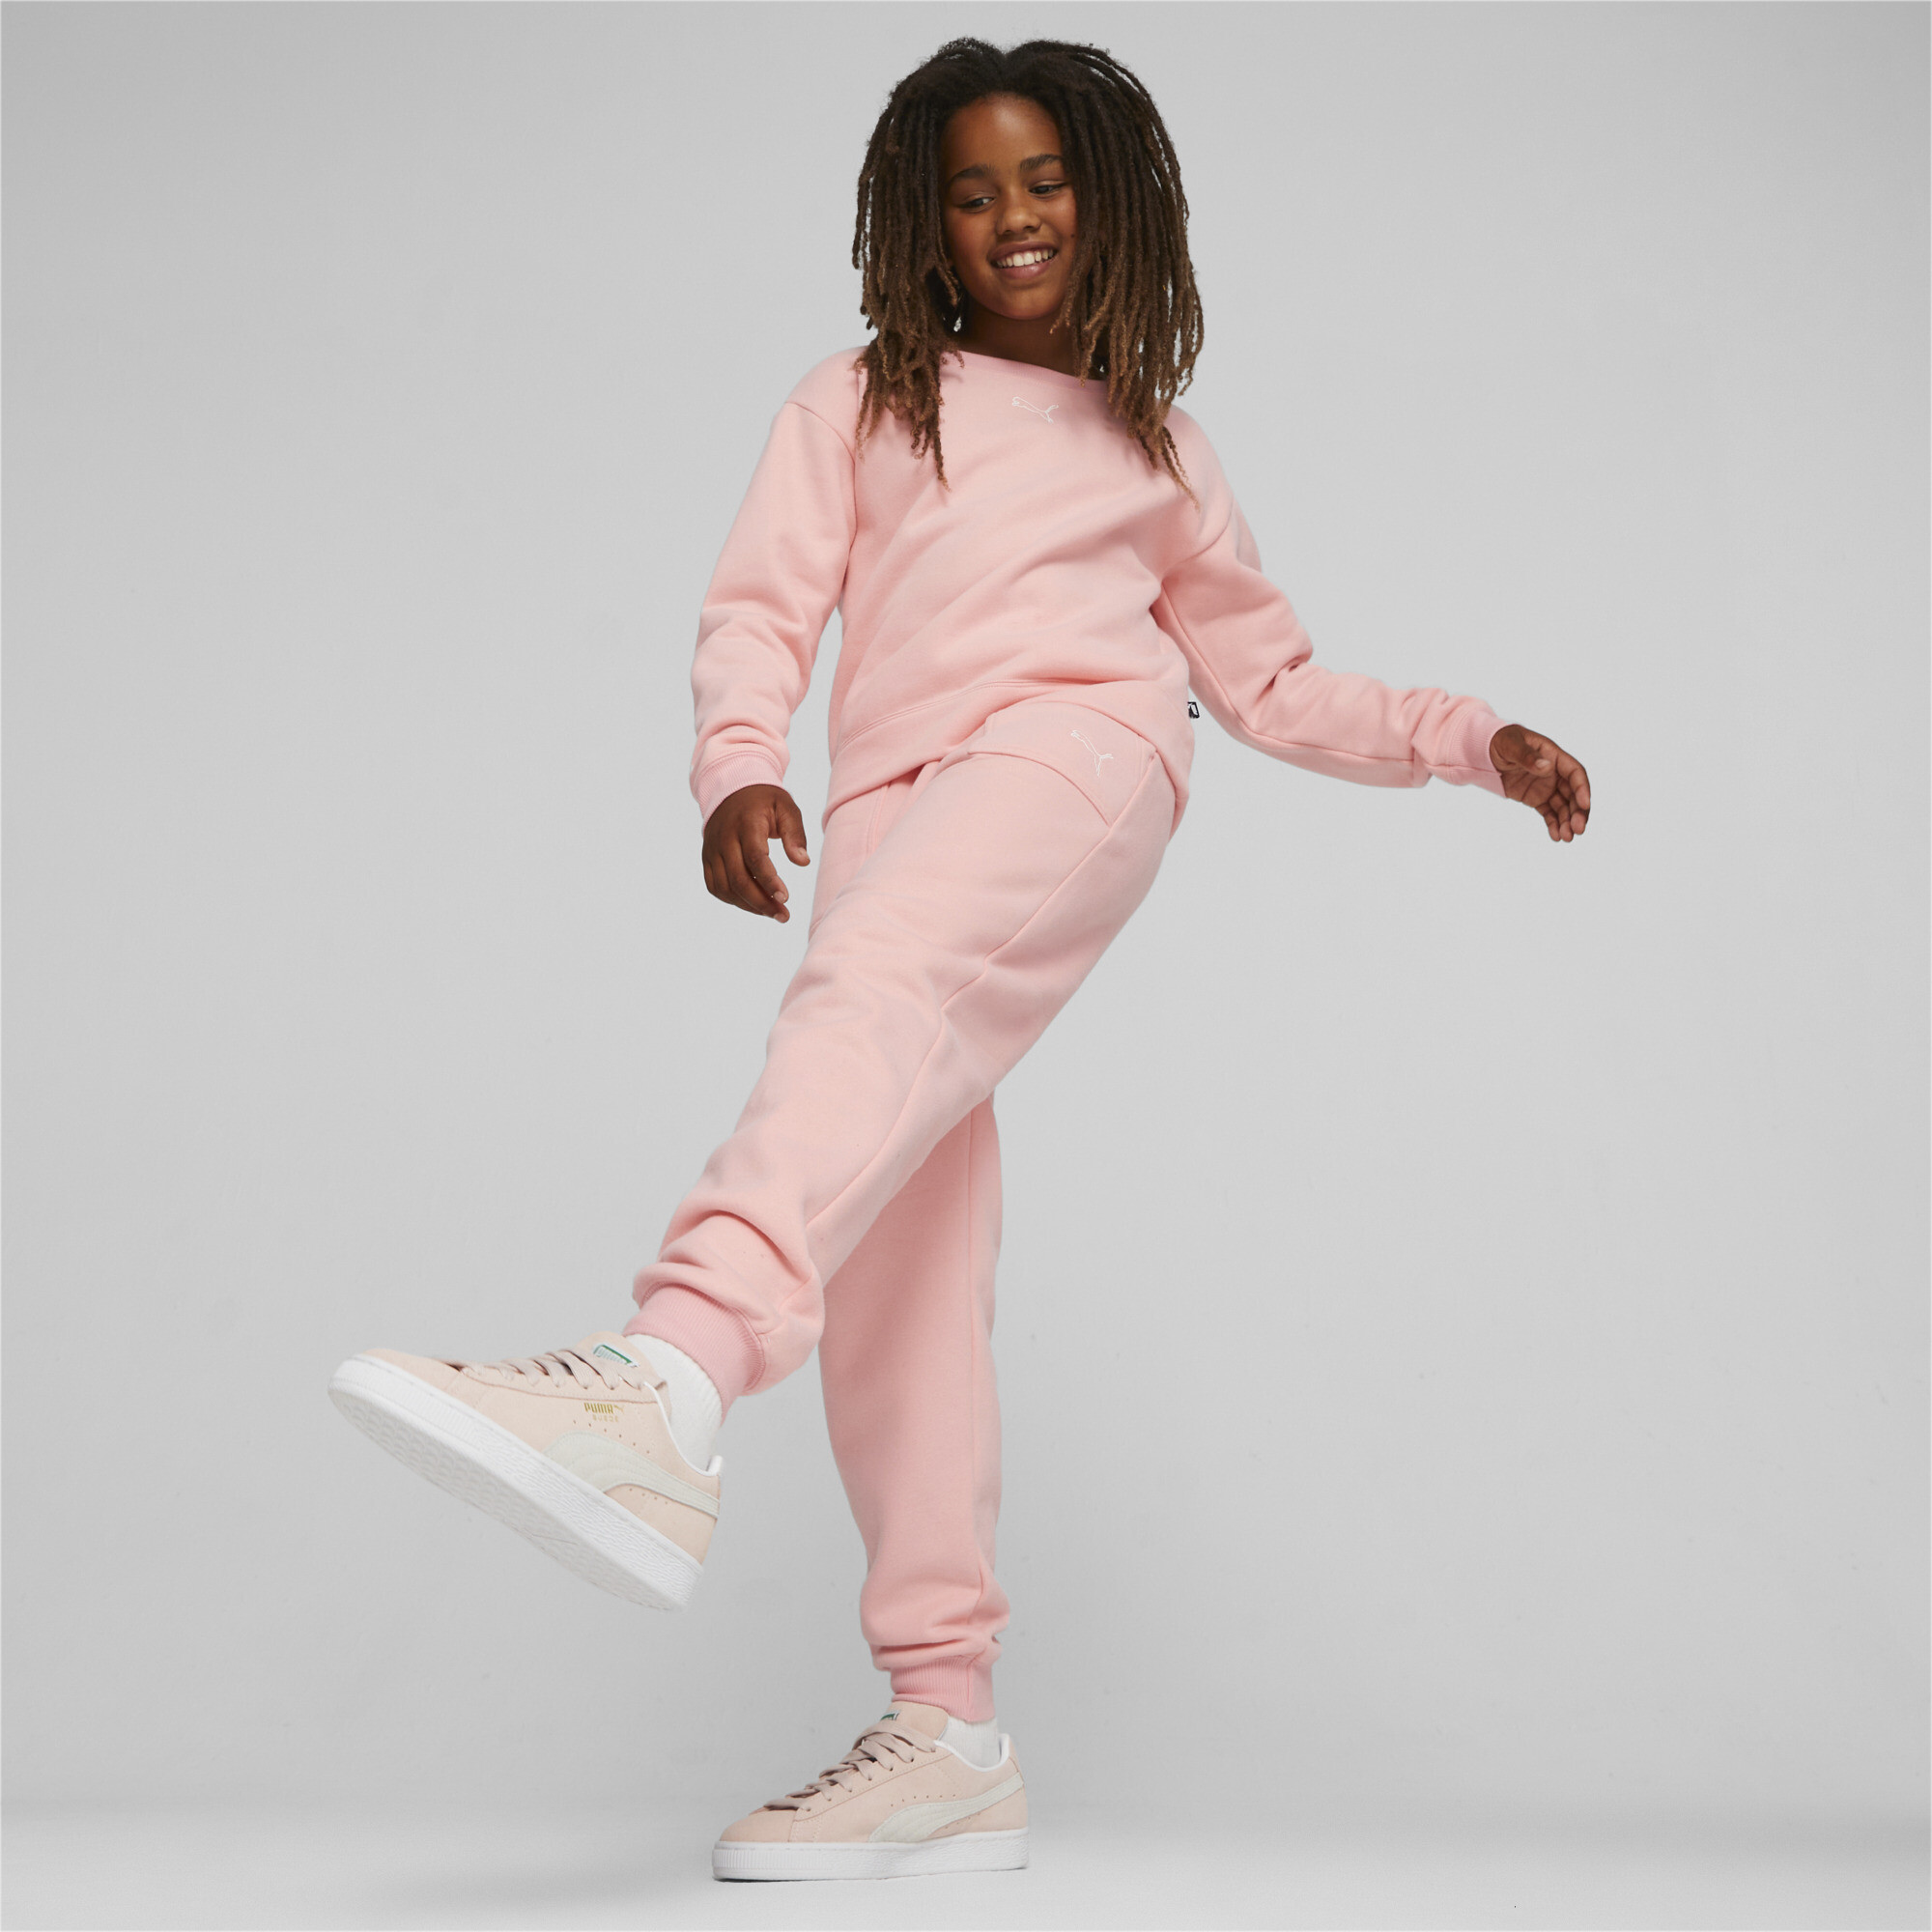 Women's Puma Loungewear Suit Youth, Pink, Size 3-4Y, Clothing